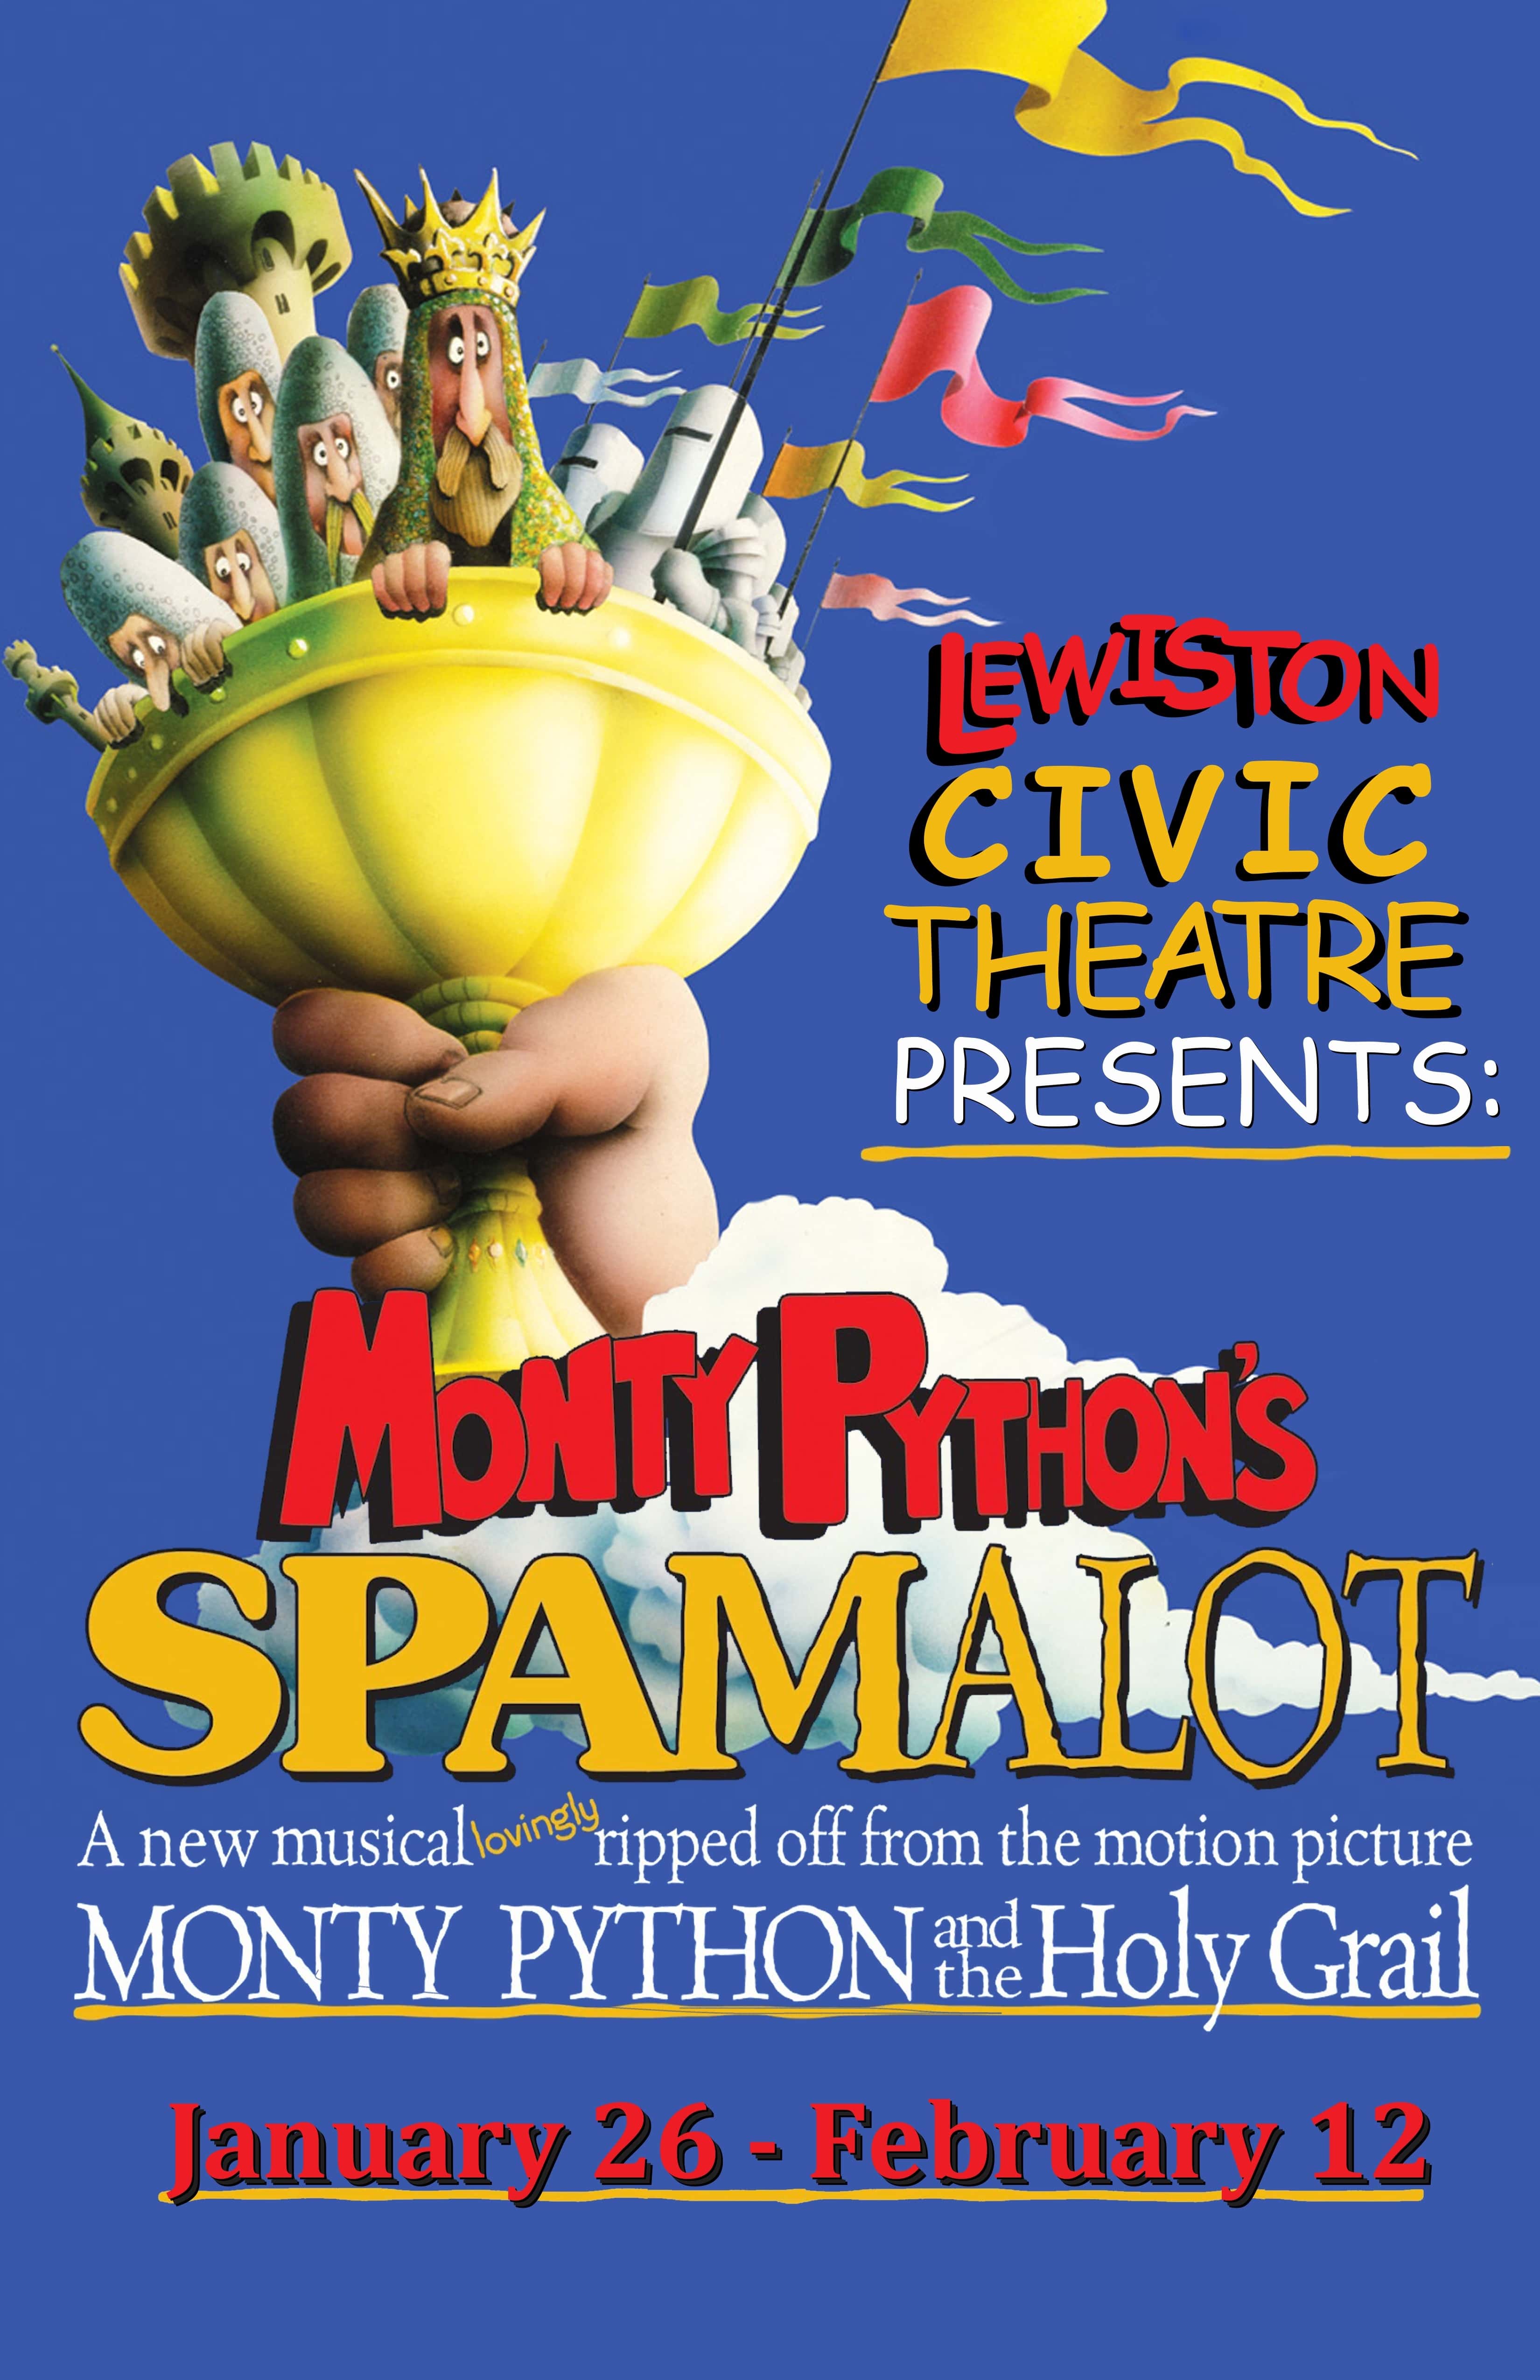 new-spamalot-updated-poster-2-1